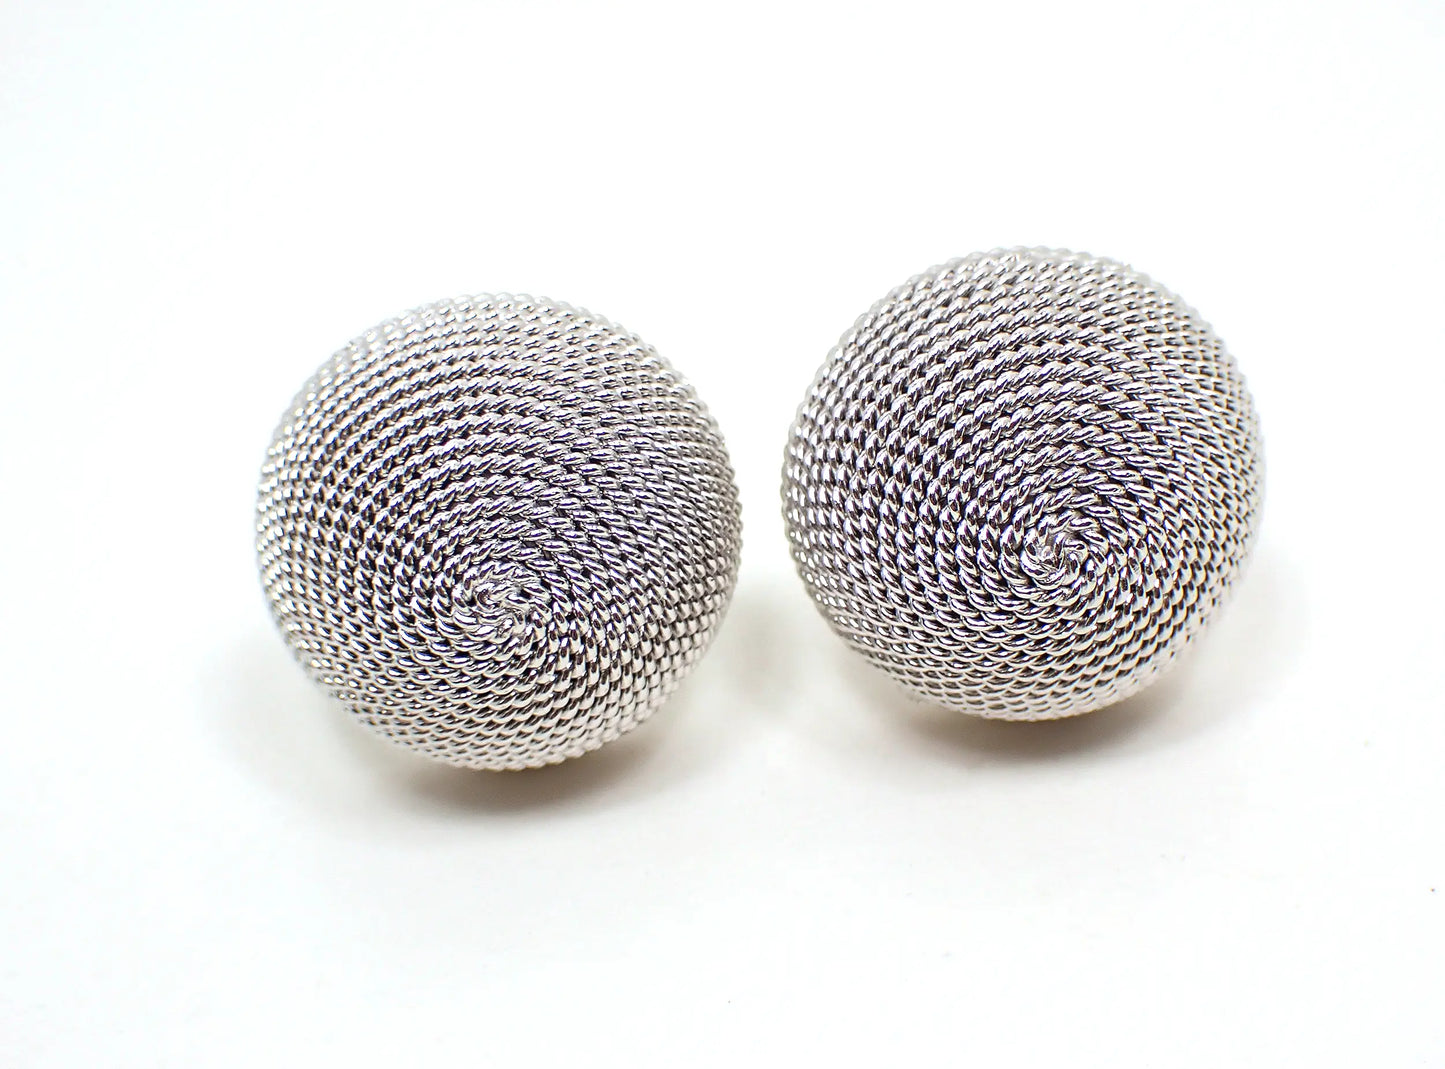 Shields Textured Silver Tone Domed Retro Vintage Cufflinks, Made in Italy for Shields Cuff Links